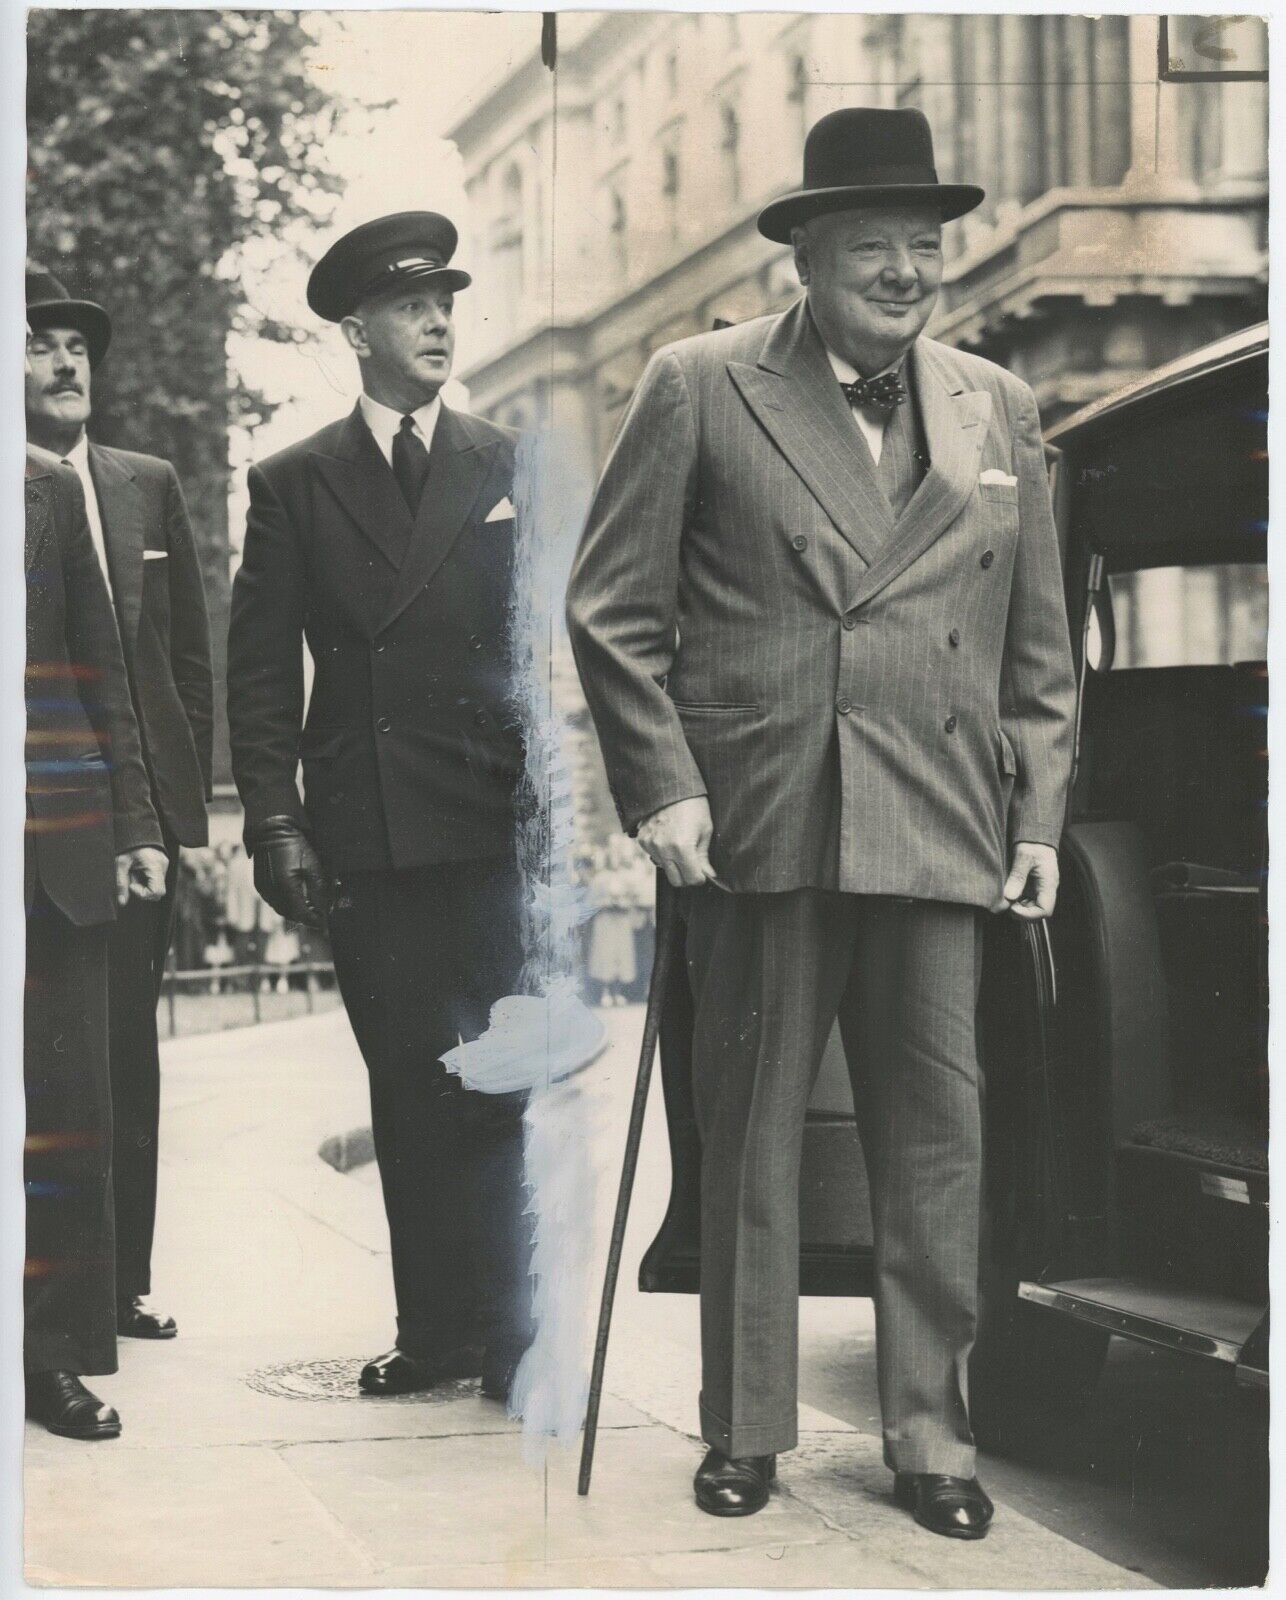 29 July 1955 press photo of Sir Winston S. Churchill arriving at 10 Downing St.